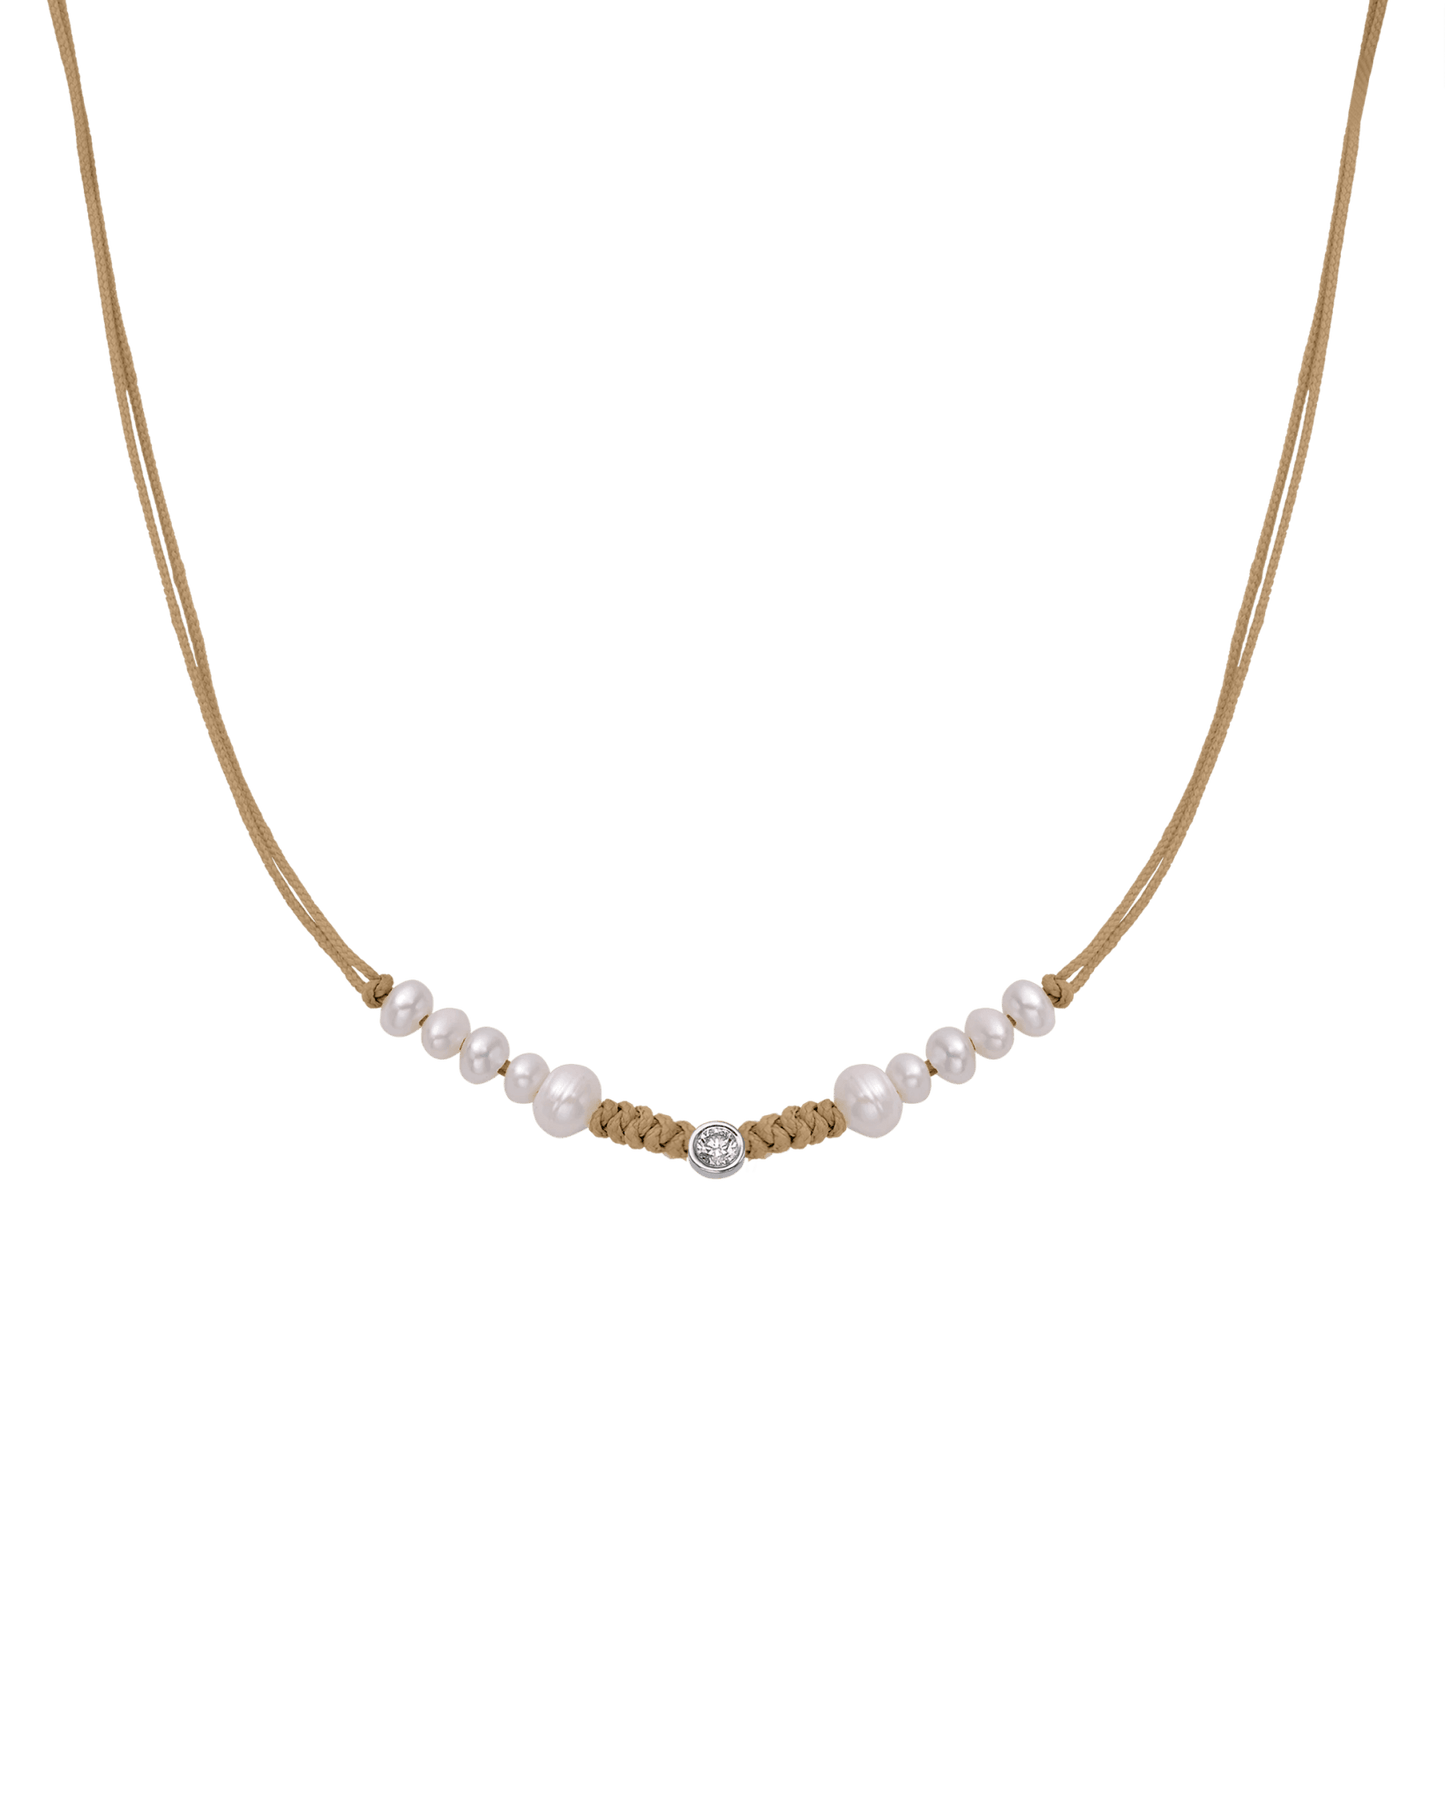 Ten Natural Pearl String of Love Necklace - 14K White Gold Necklaces 14K Solid Gold Camel Large: 0.1ct 